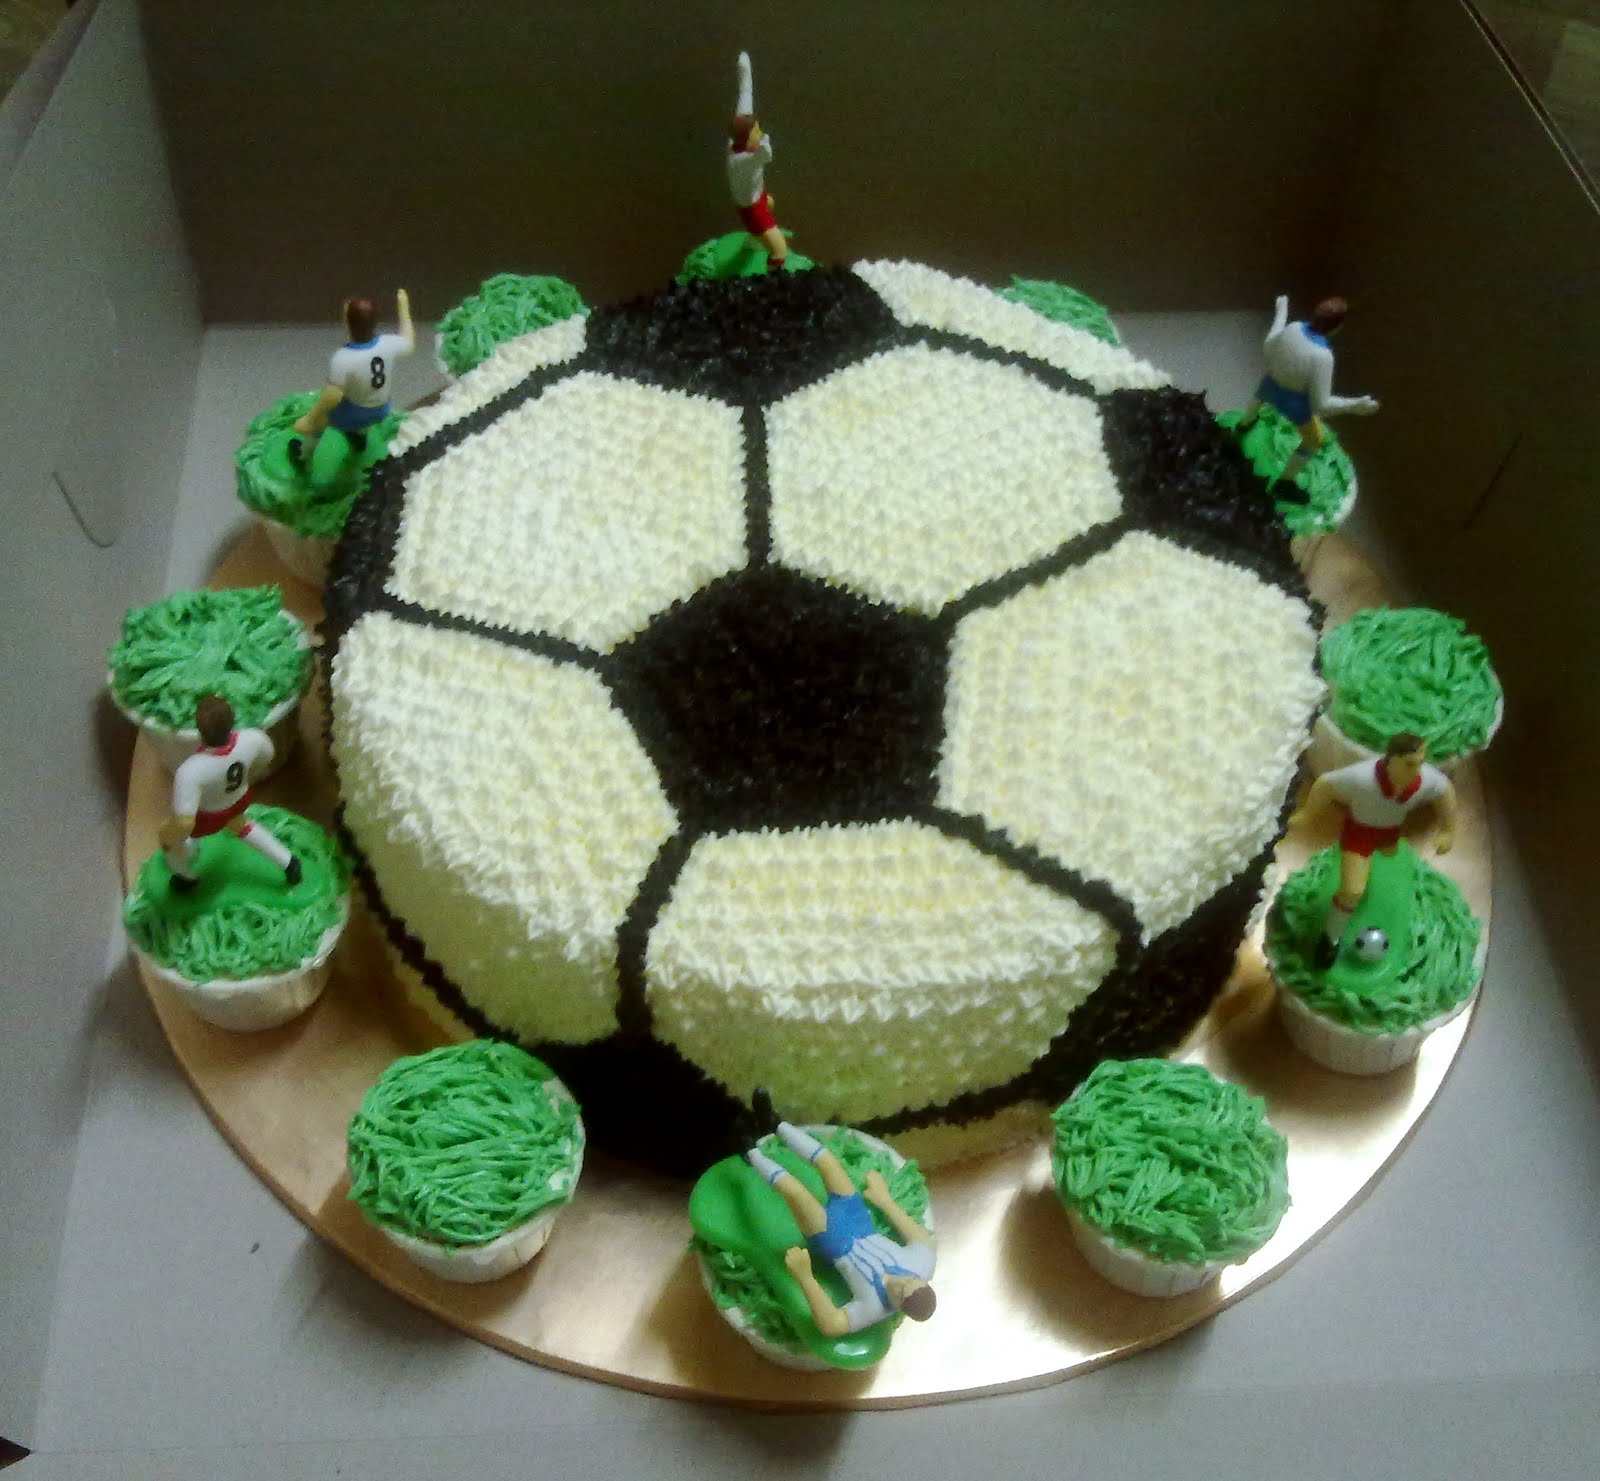 sOcCEr CaKeS ;) | MY CUP CAKES FANTASY